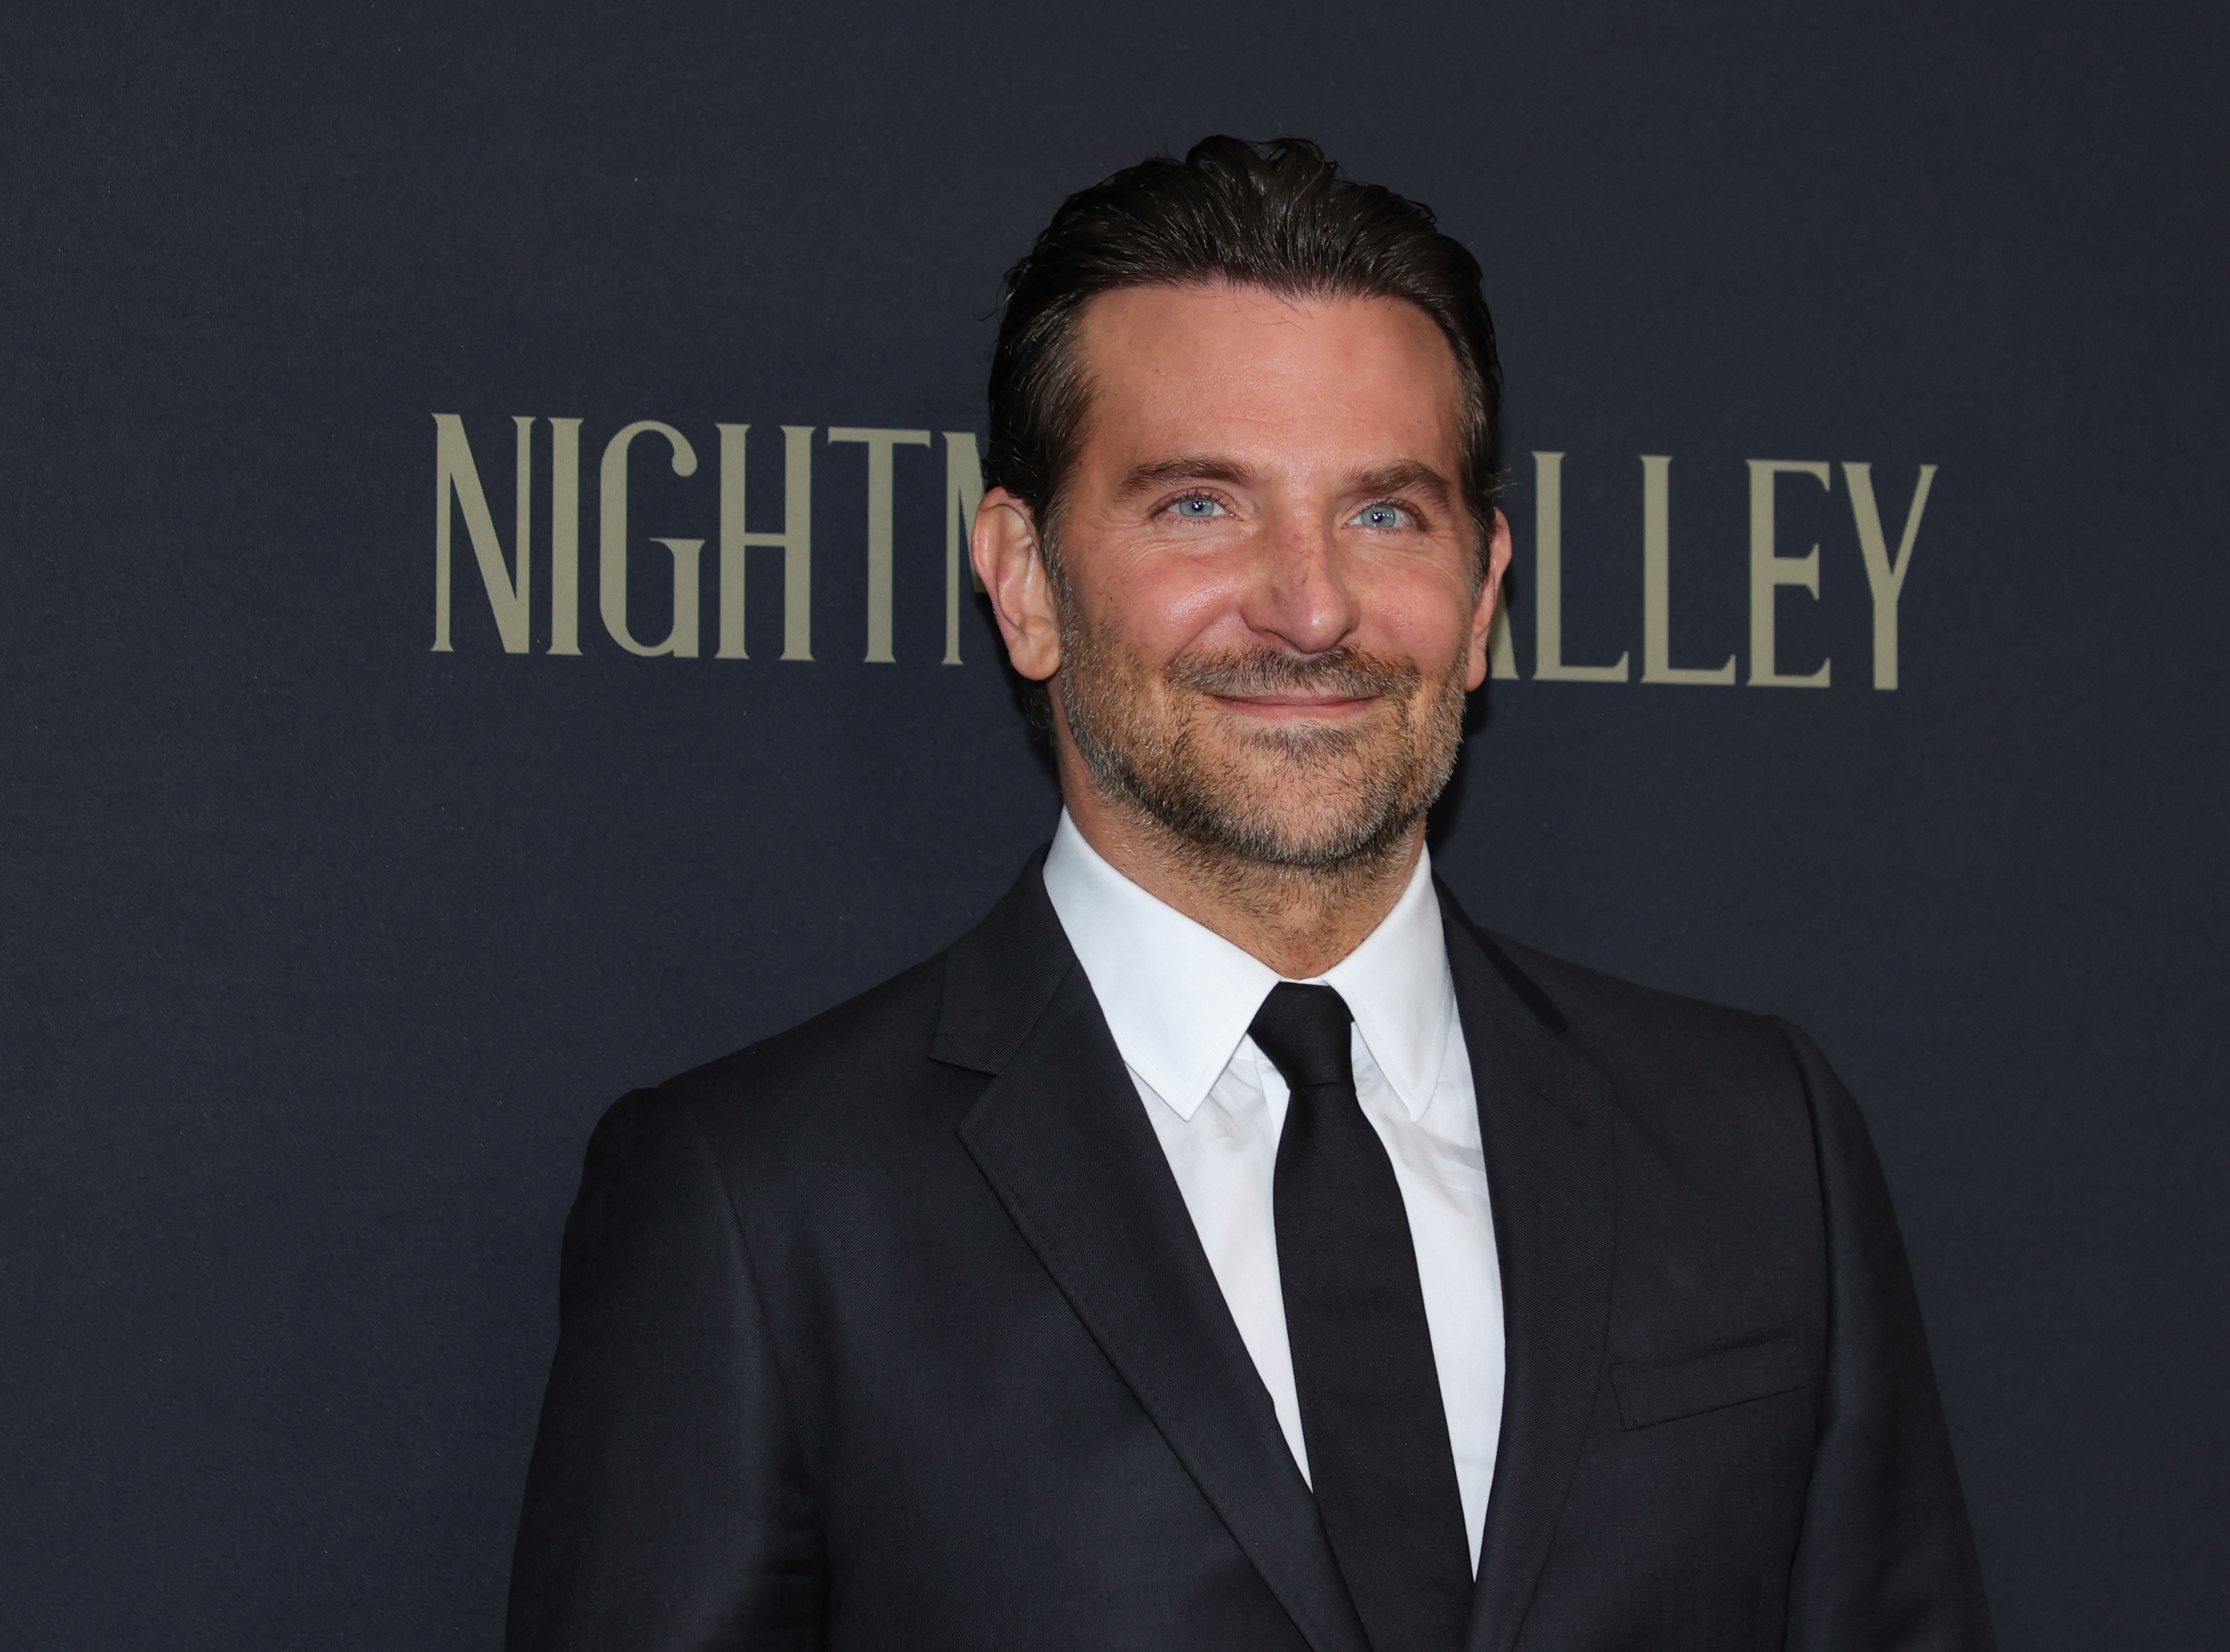 Bradley Cooper attends the world premiere of Nightmare Alley